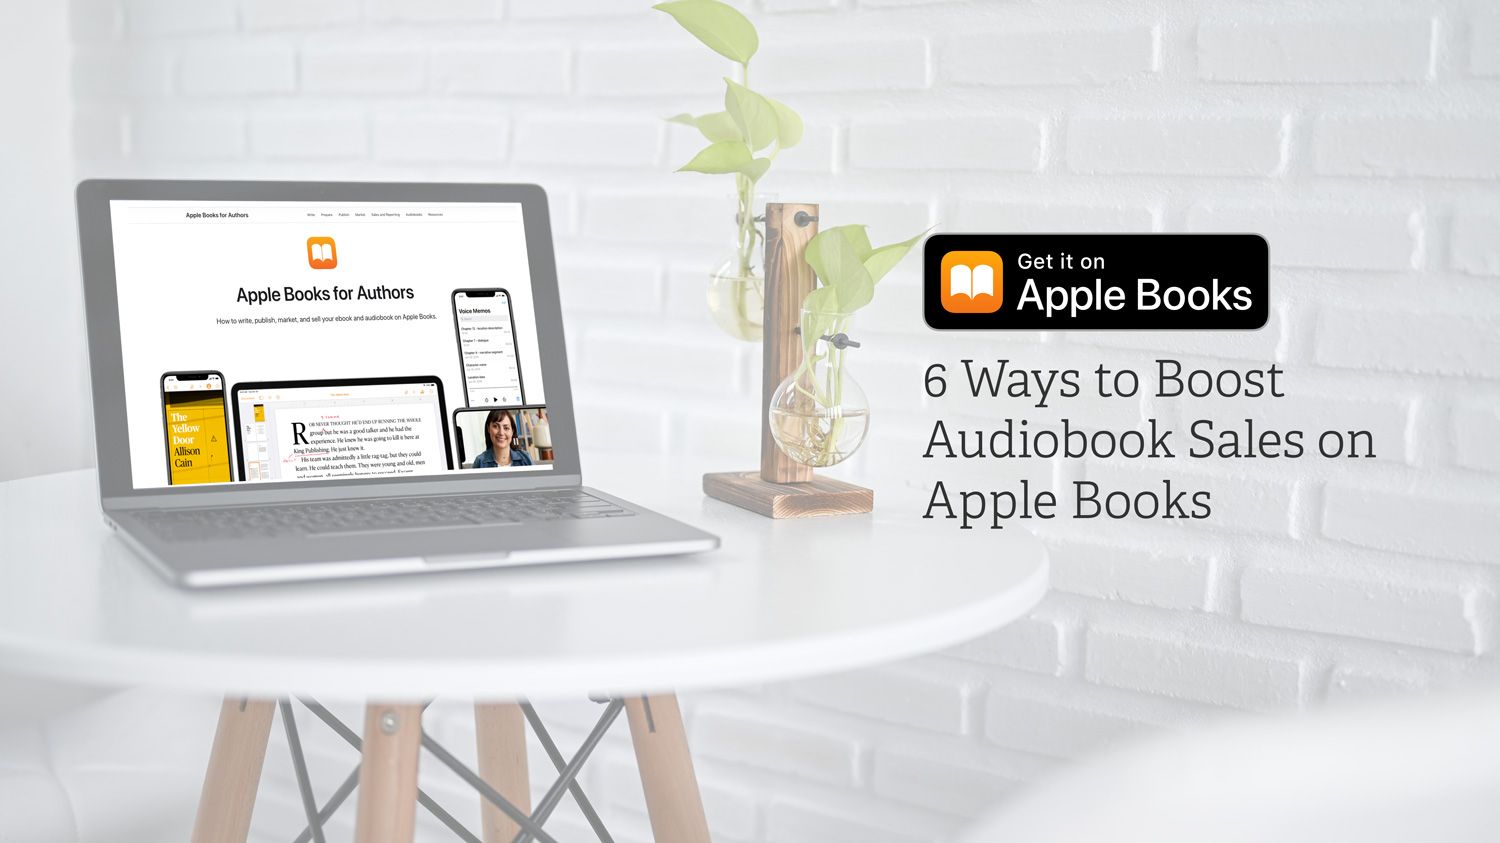 6 Ways to Boost Audiobook Sales on Apple Books